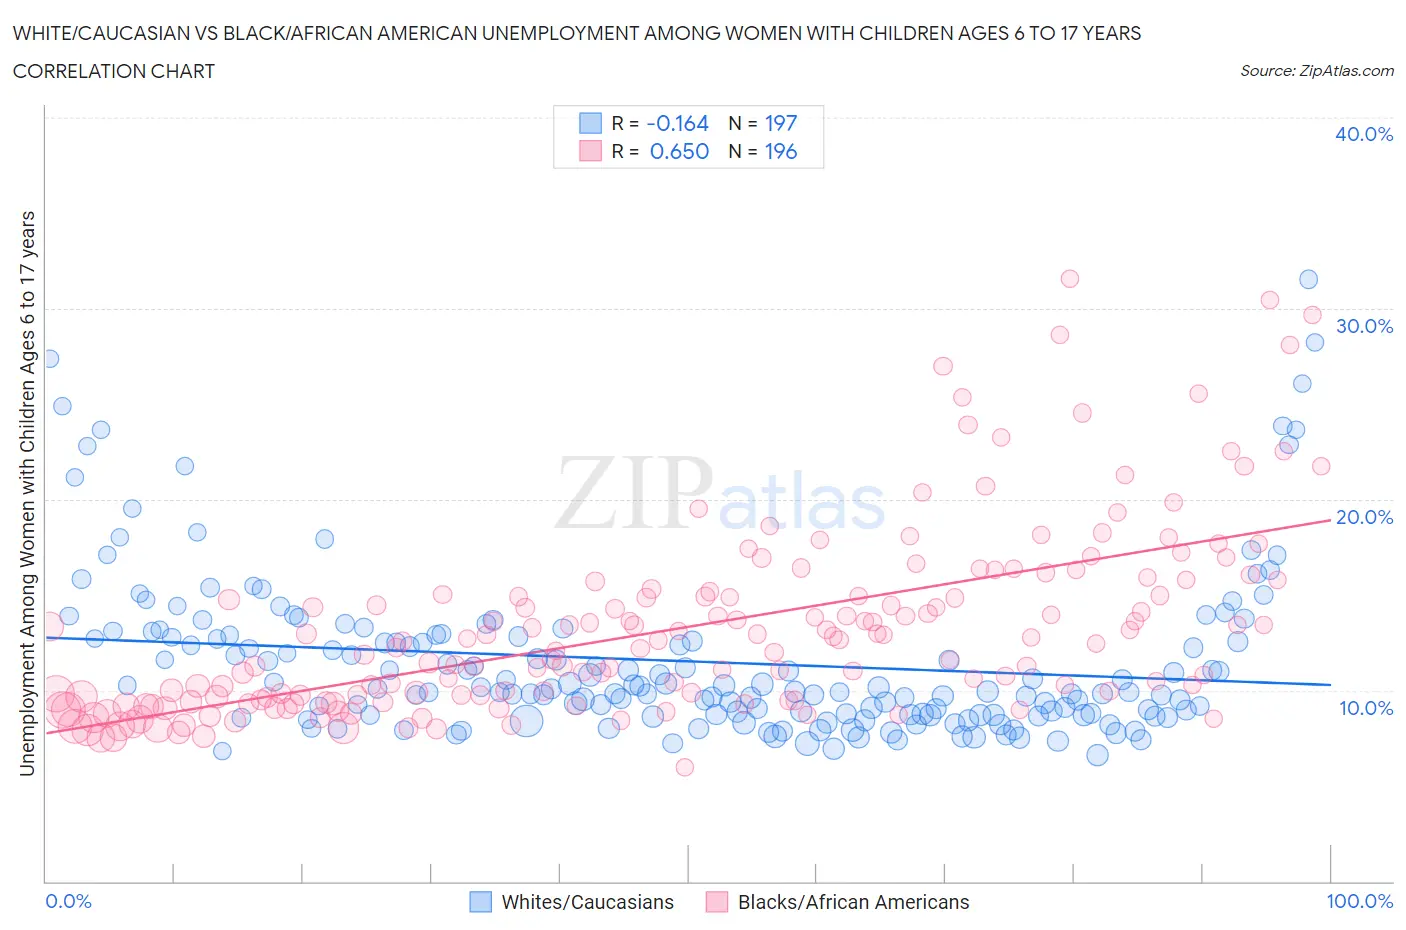 White/Caucasian vs Black/African American Unemployment Among Women with Children Ages 6 to 17 years